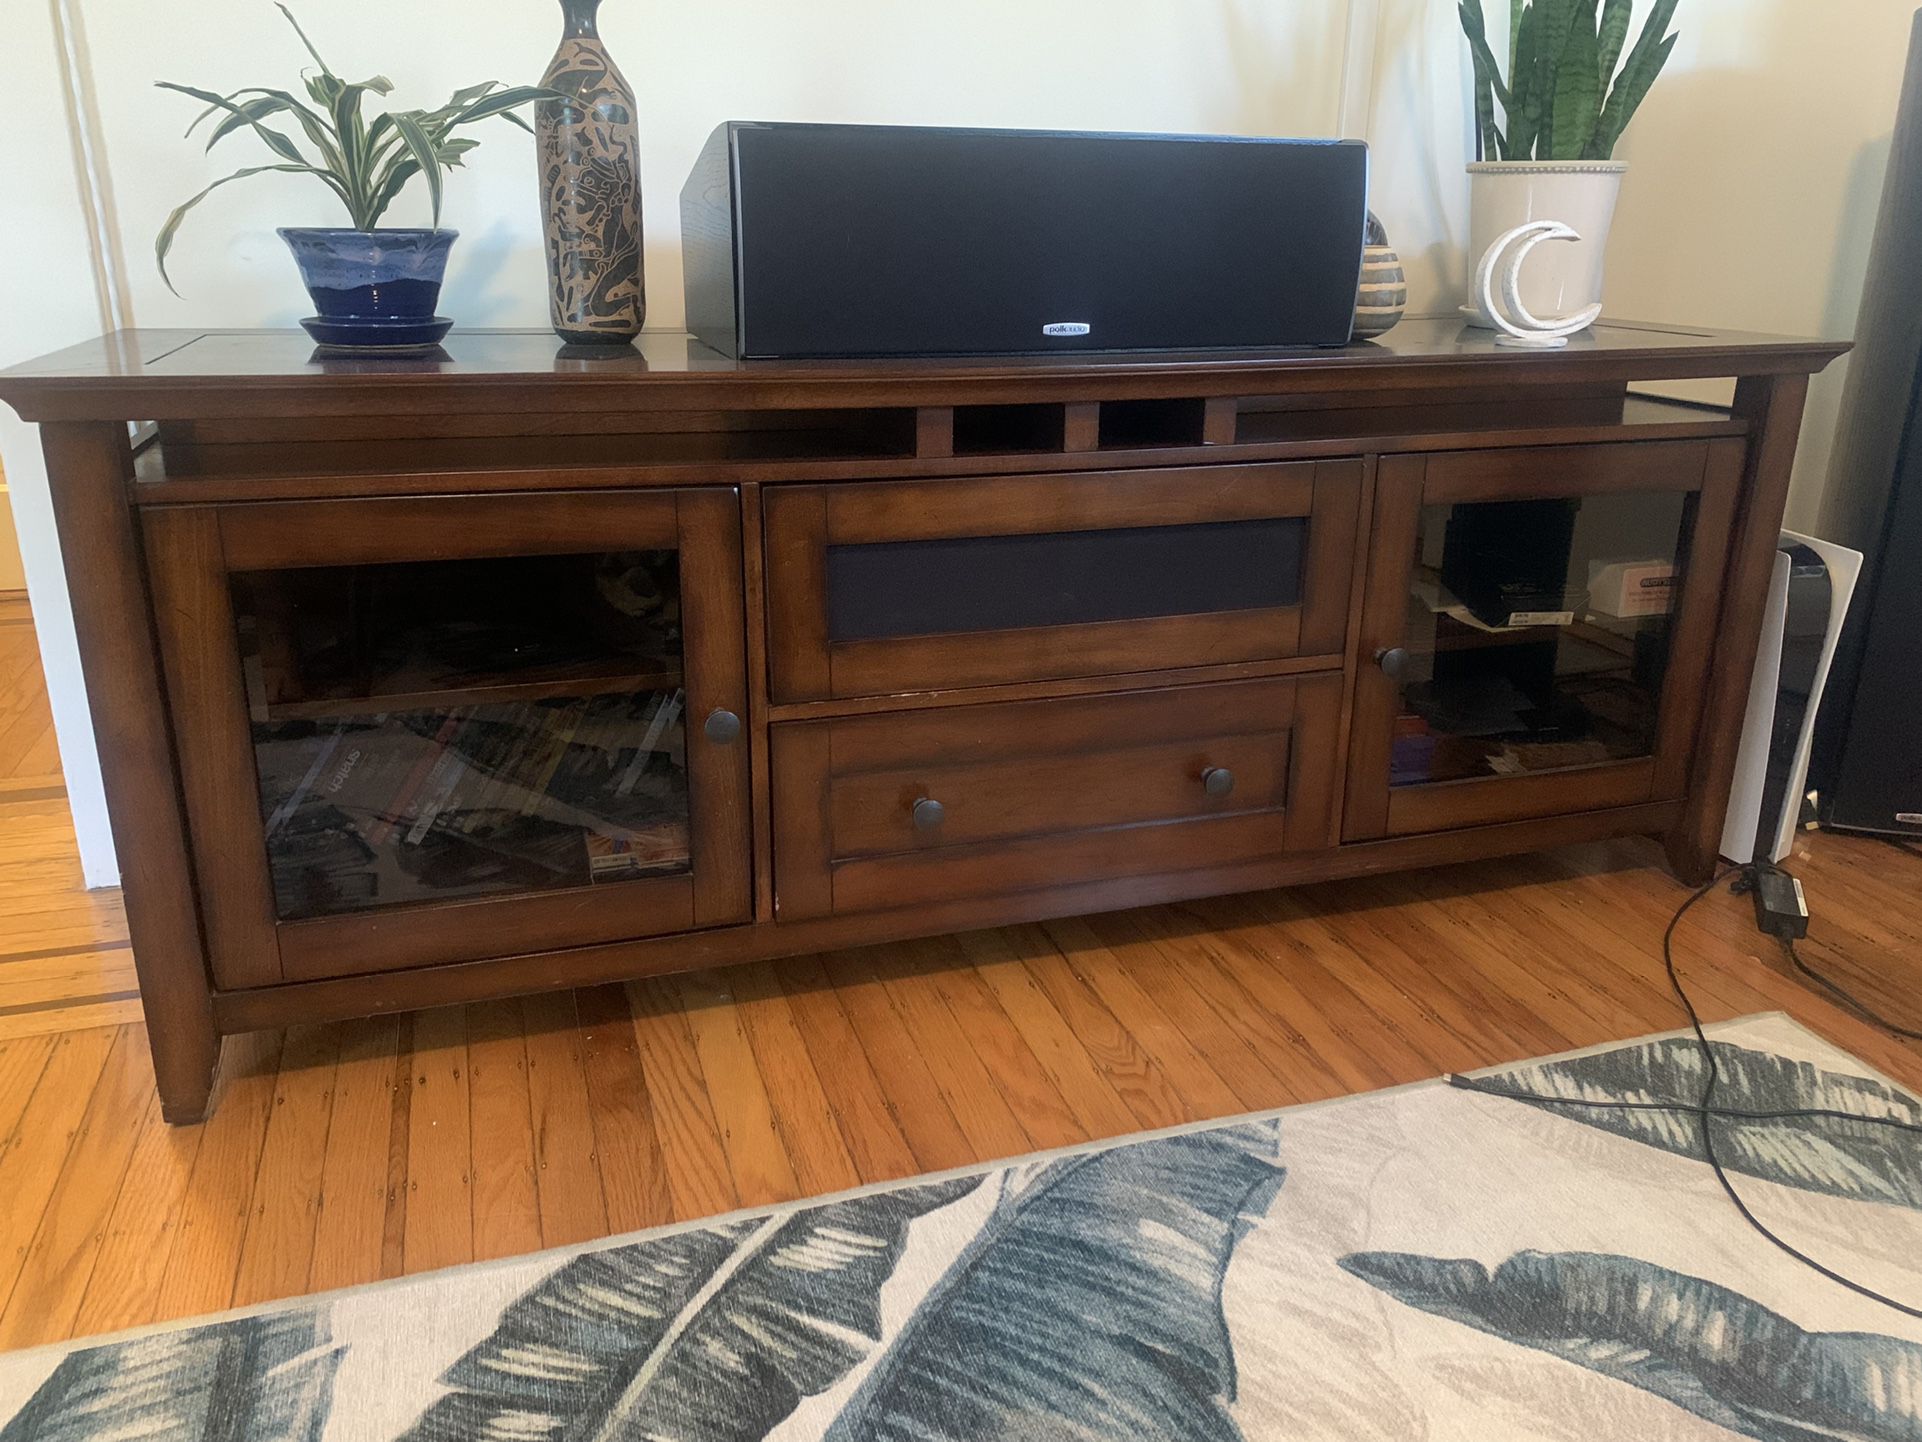 TV Stand Cabinet